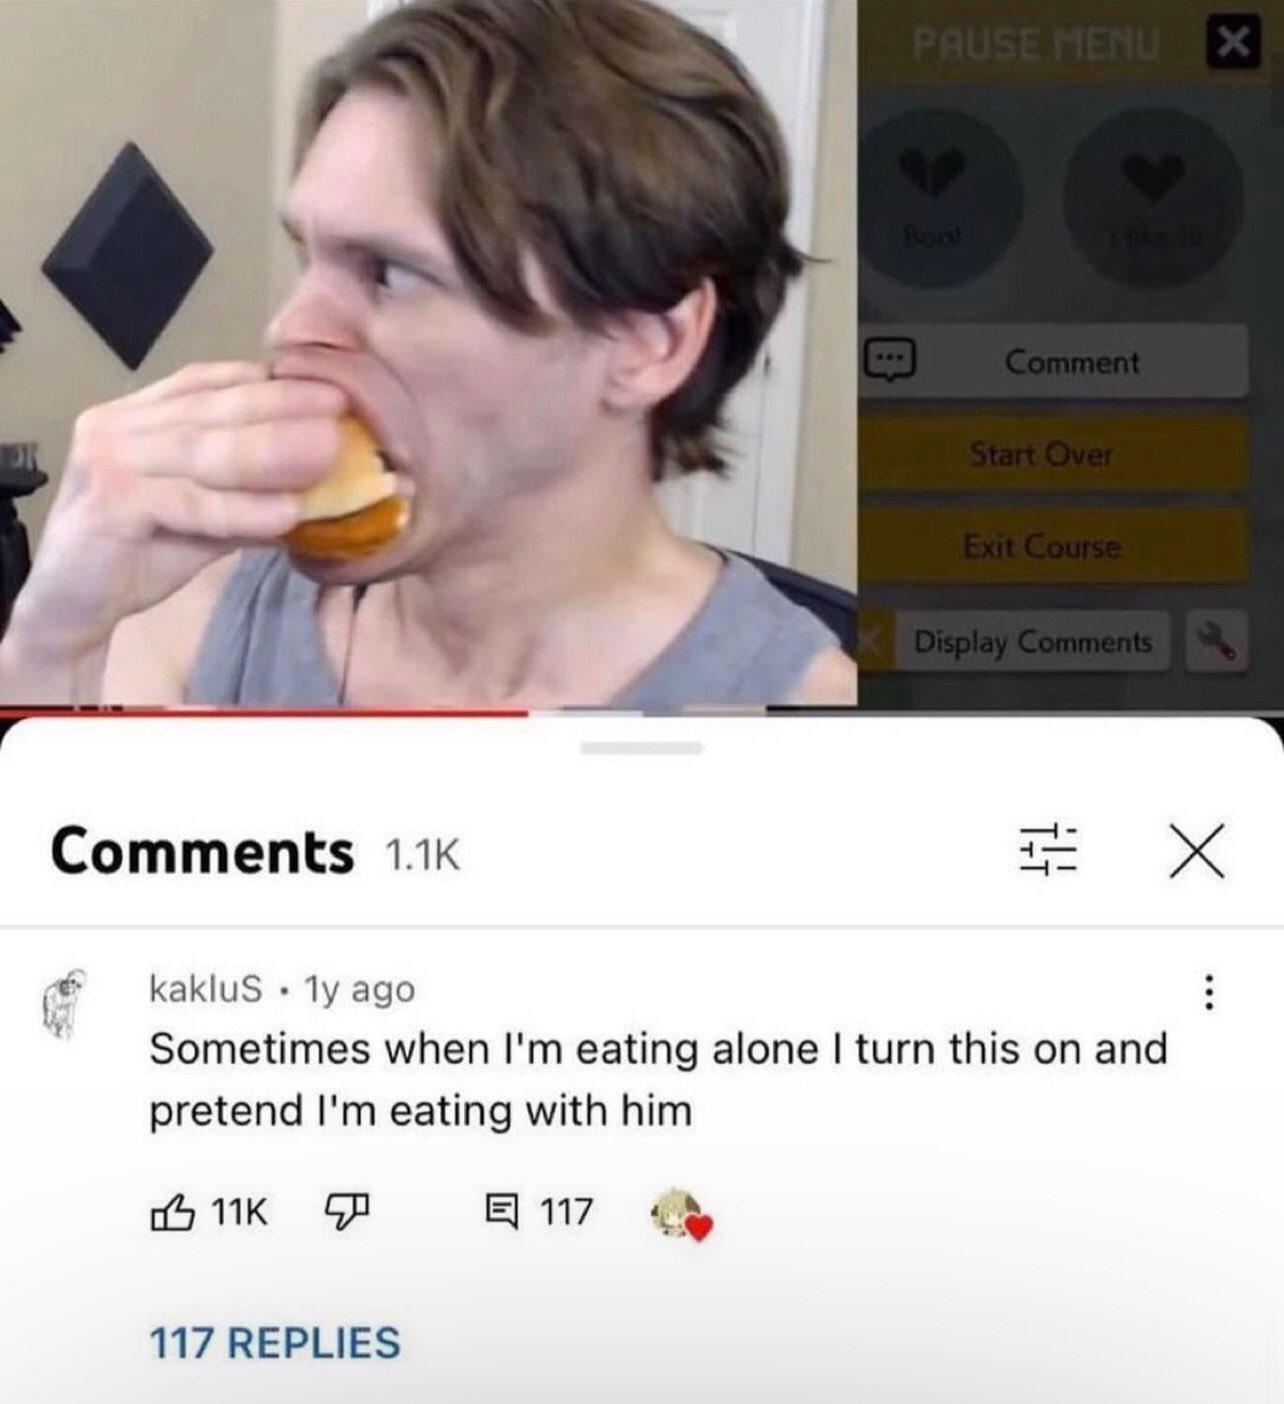 funny and savage youtube comments - jaw - 11K Pause Menu 117 Replies Comment Start Over Exit Course Display kaklus 1y ago Sometimes when I'm eating alone I turn this on and pretend I'm eating with him 117 X